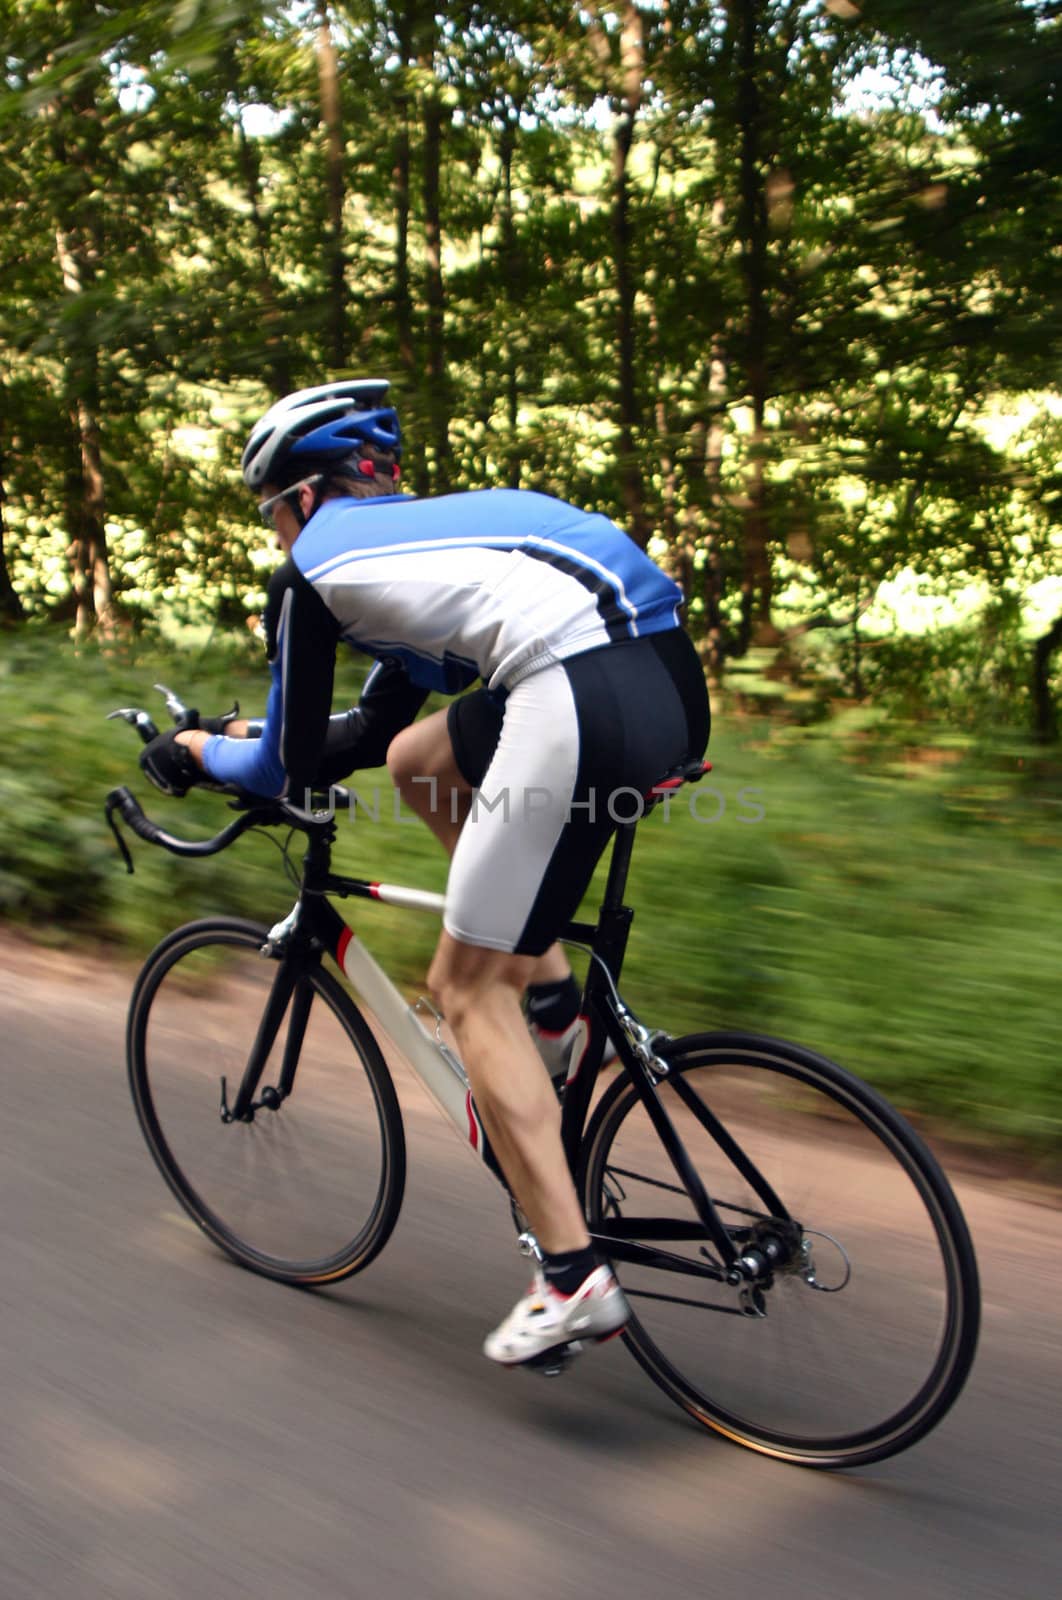 An action shot of a cyclist on a road bike during a race. 